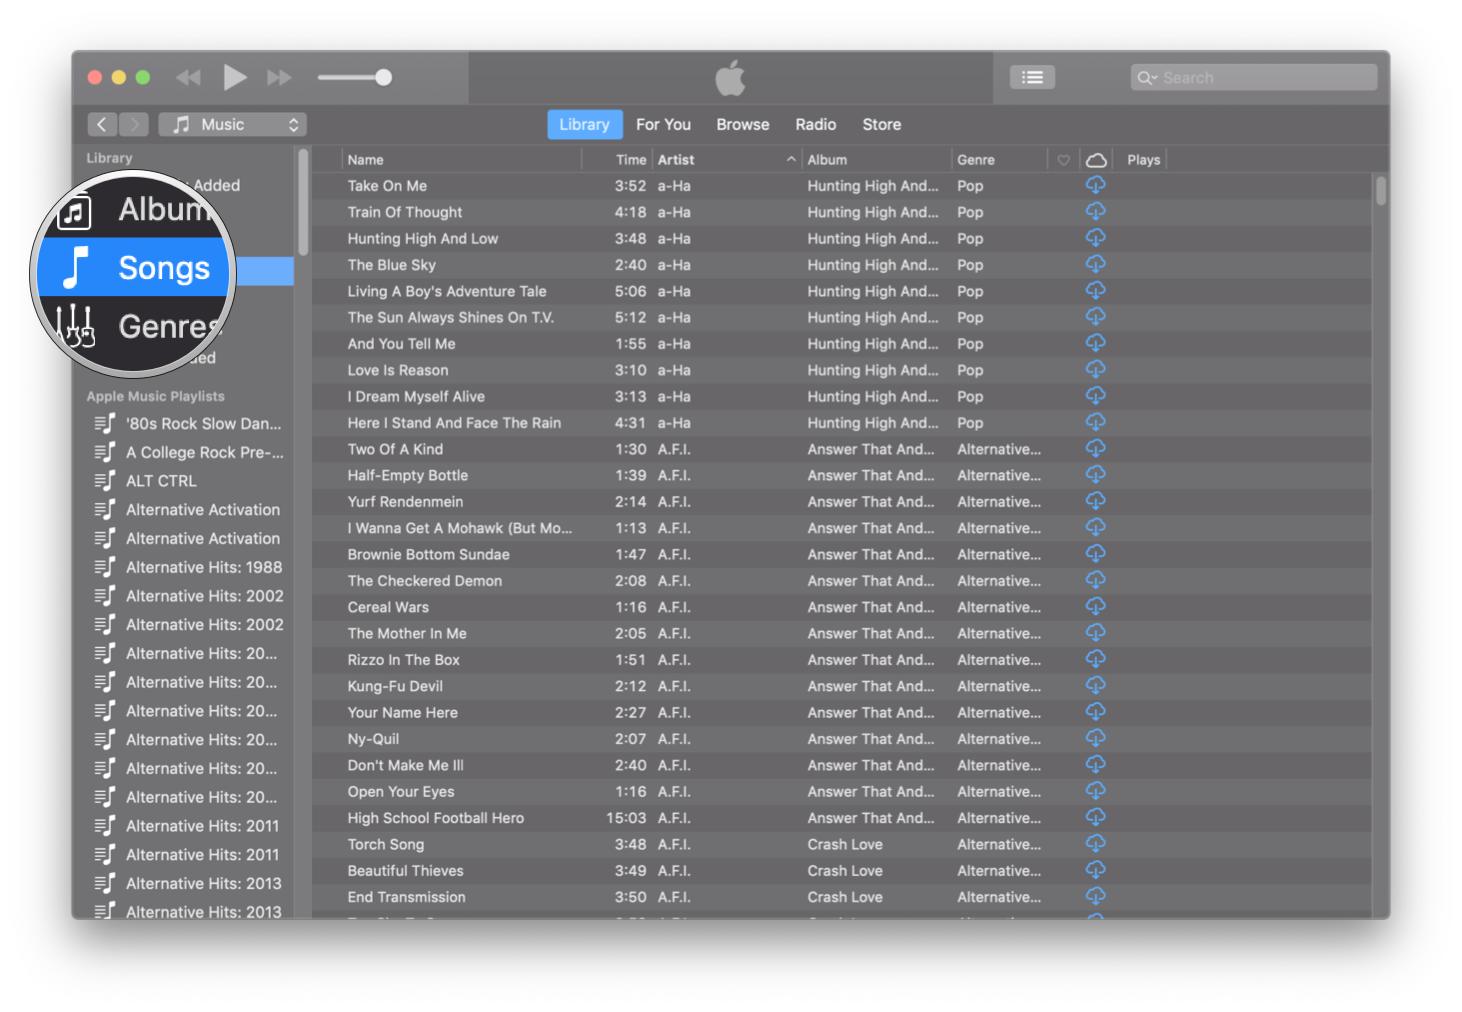 Select Songs in Library